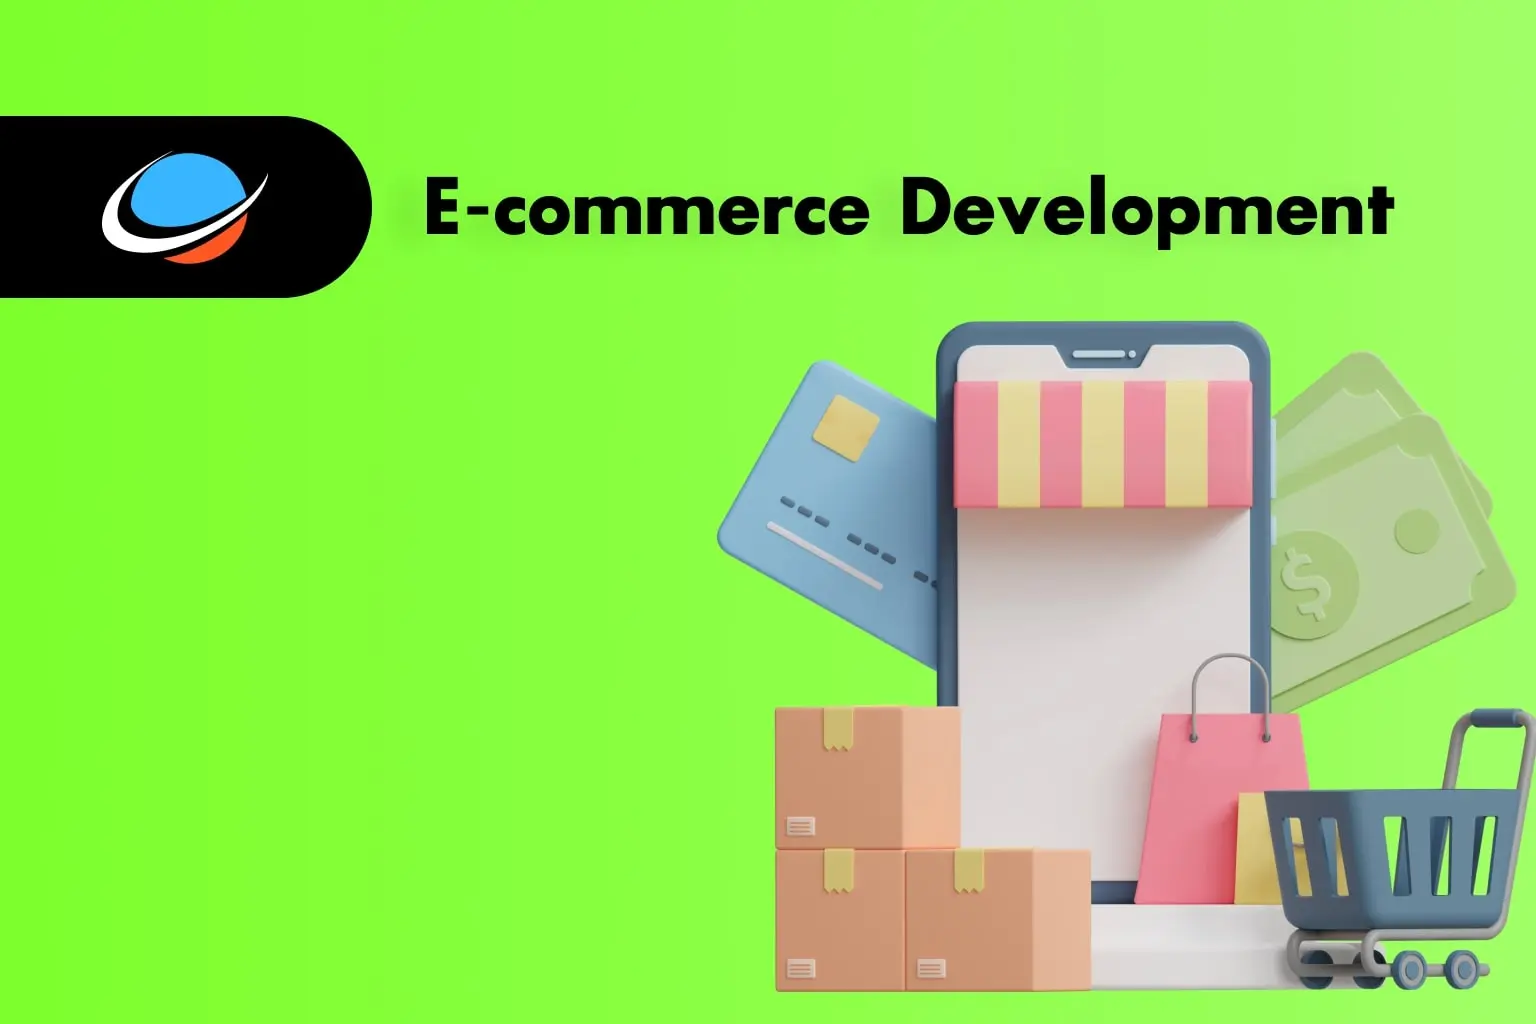 E-commerce Development. Our tailored solutions elevate online presence, ensuring a seamless journey from product discovery to secure transactions. With Air Global Tech, boost your E-commerce game, exceed customer expectations.